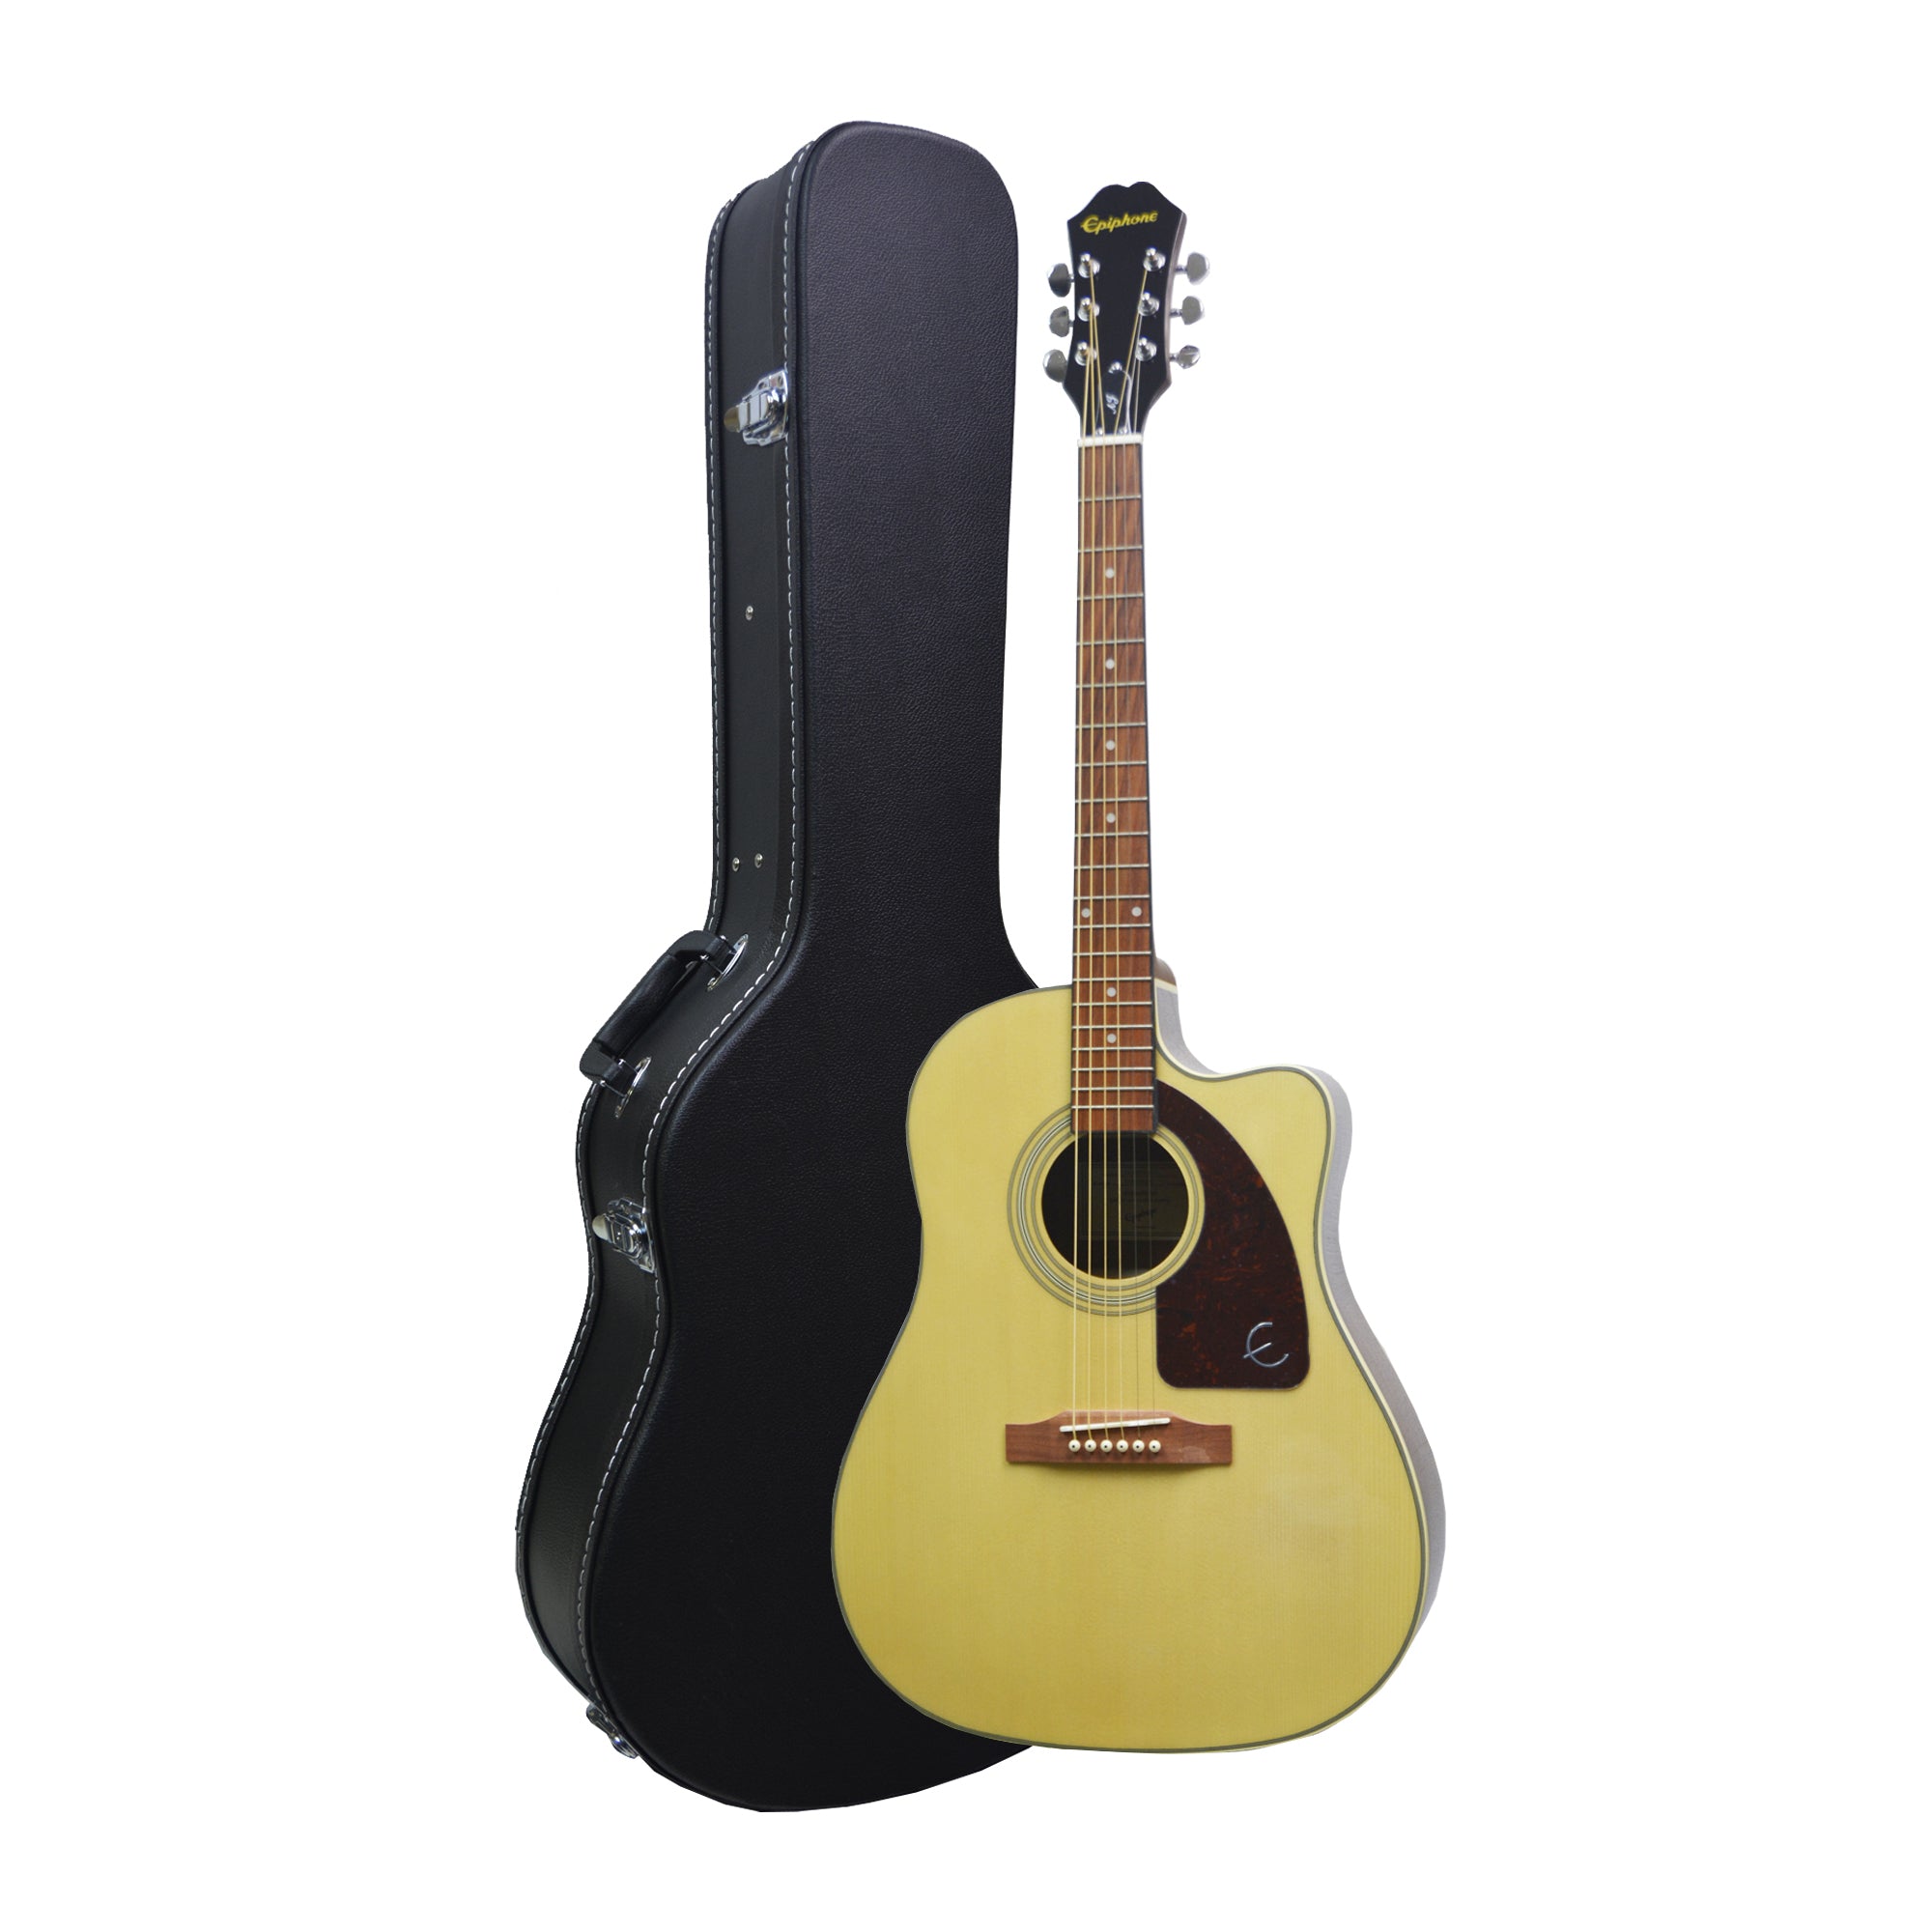 Epiphone EE21NACH1 J-15 EC Deluxe Fishman Presys-II Natural Acoustic/Electric Guitar with Hardcase